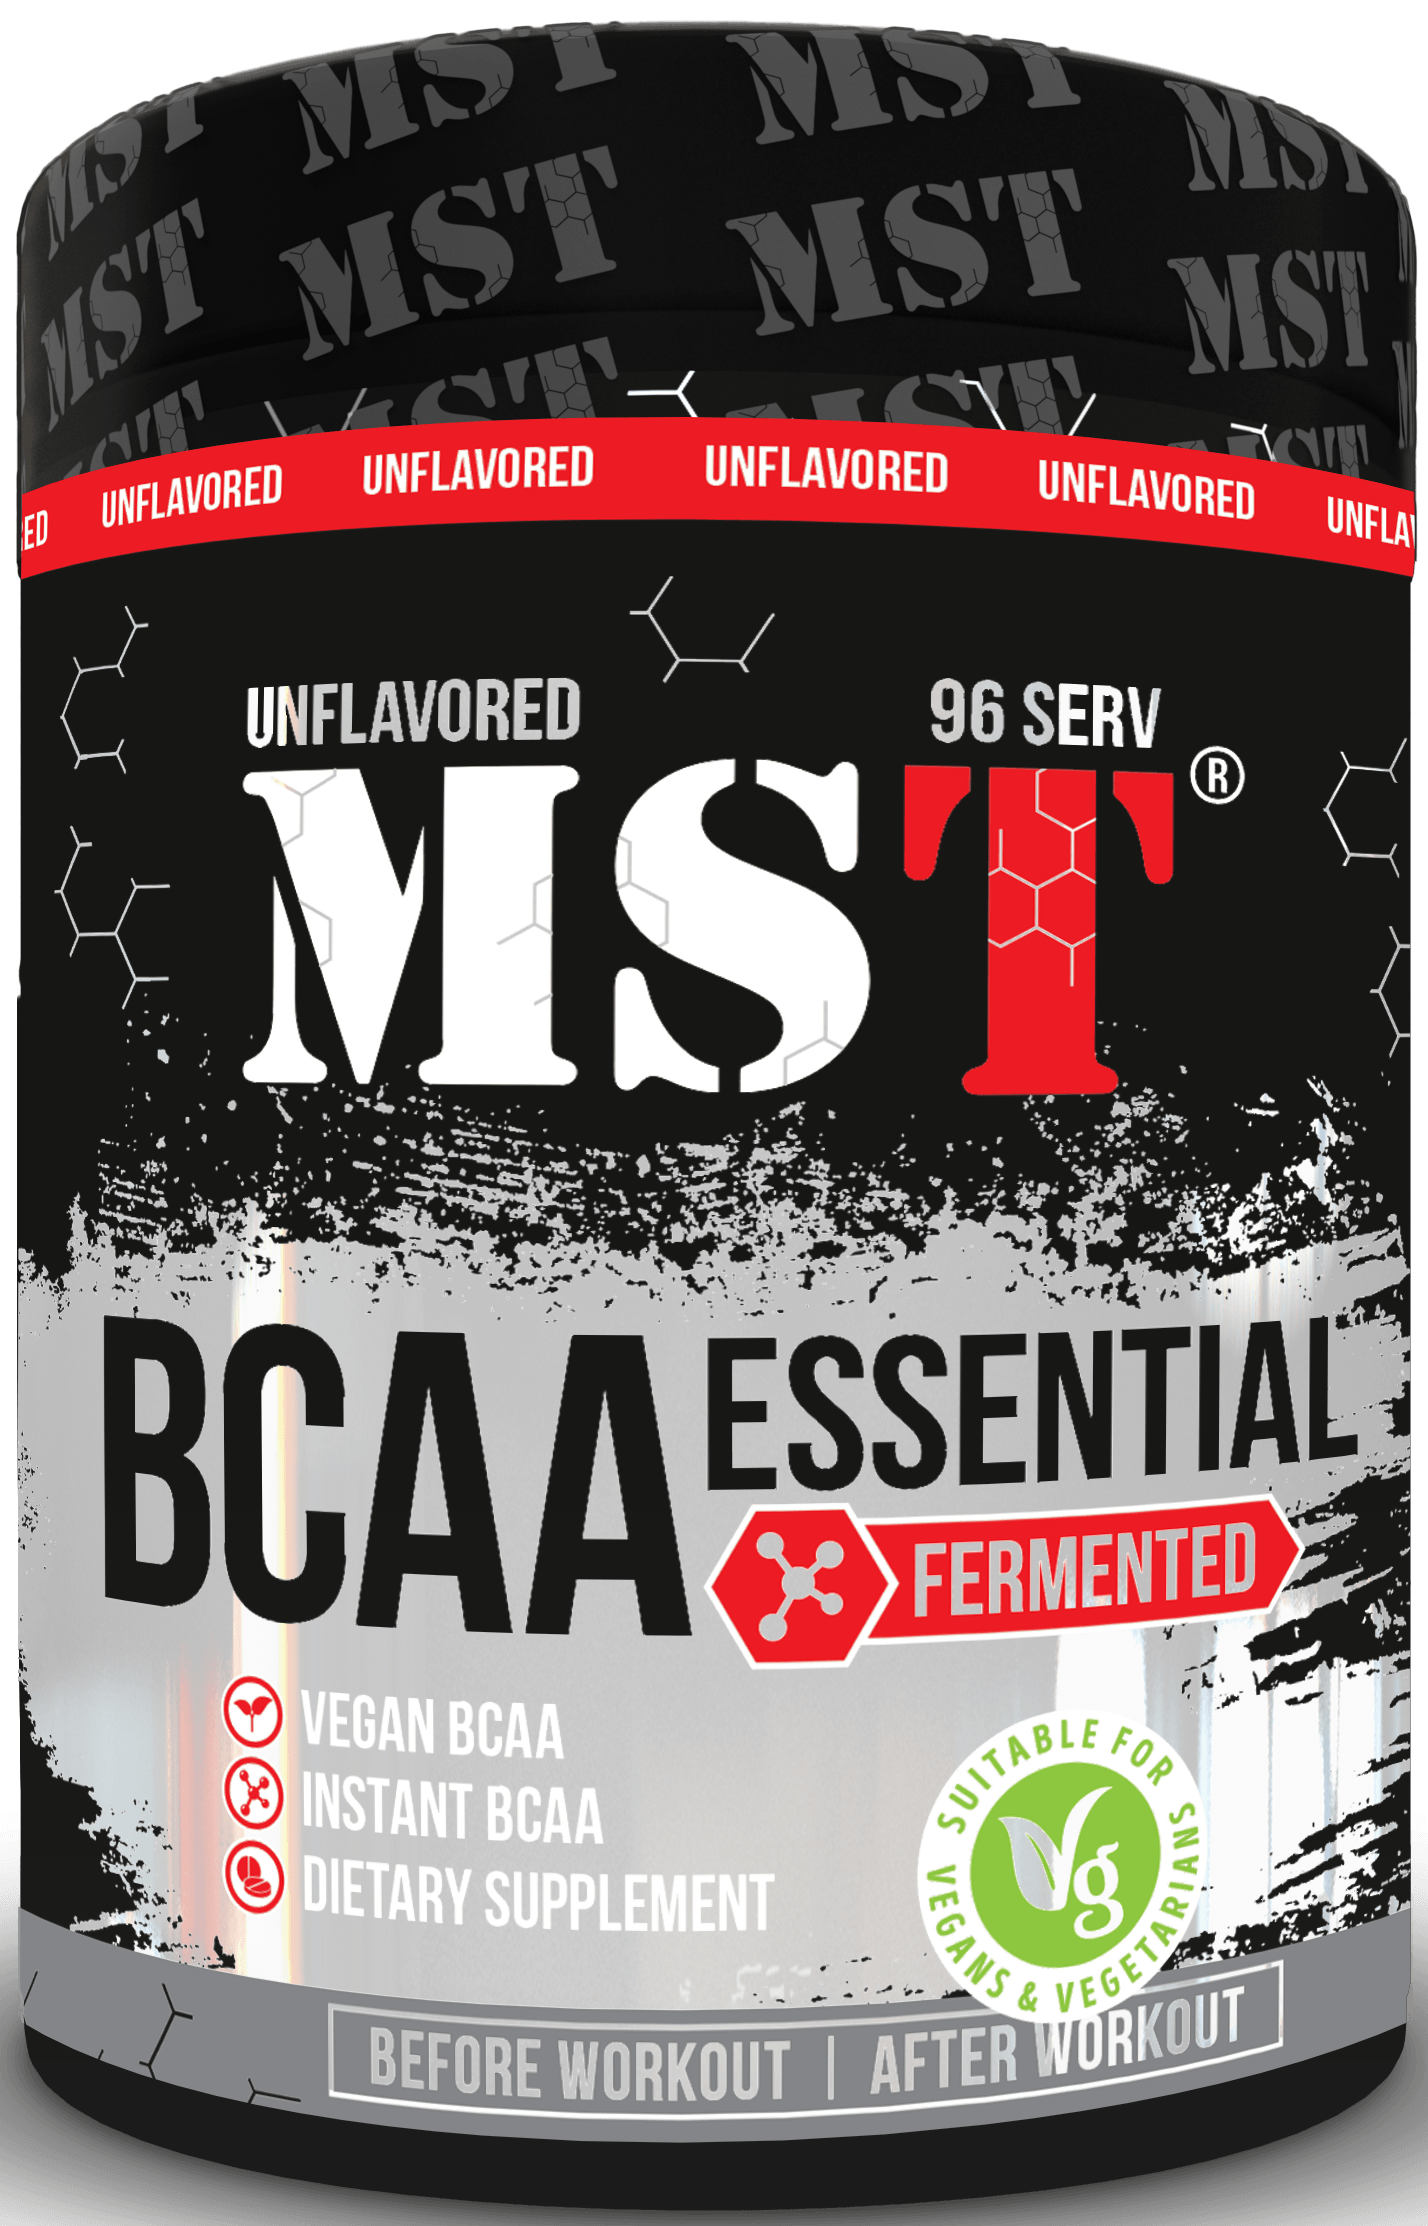 BCAA Essential Fermented, 480 gr, MST Nutrition. BCAA. Weight Loss recovery Anti-catabolic properties Lean muscle mass 